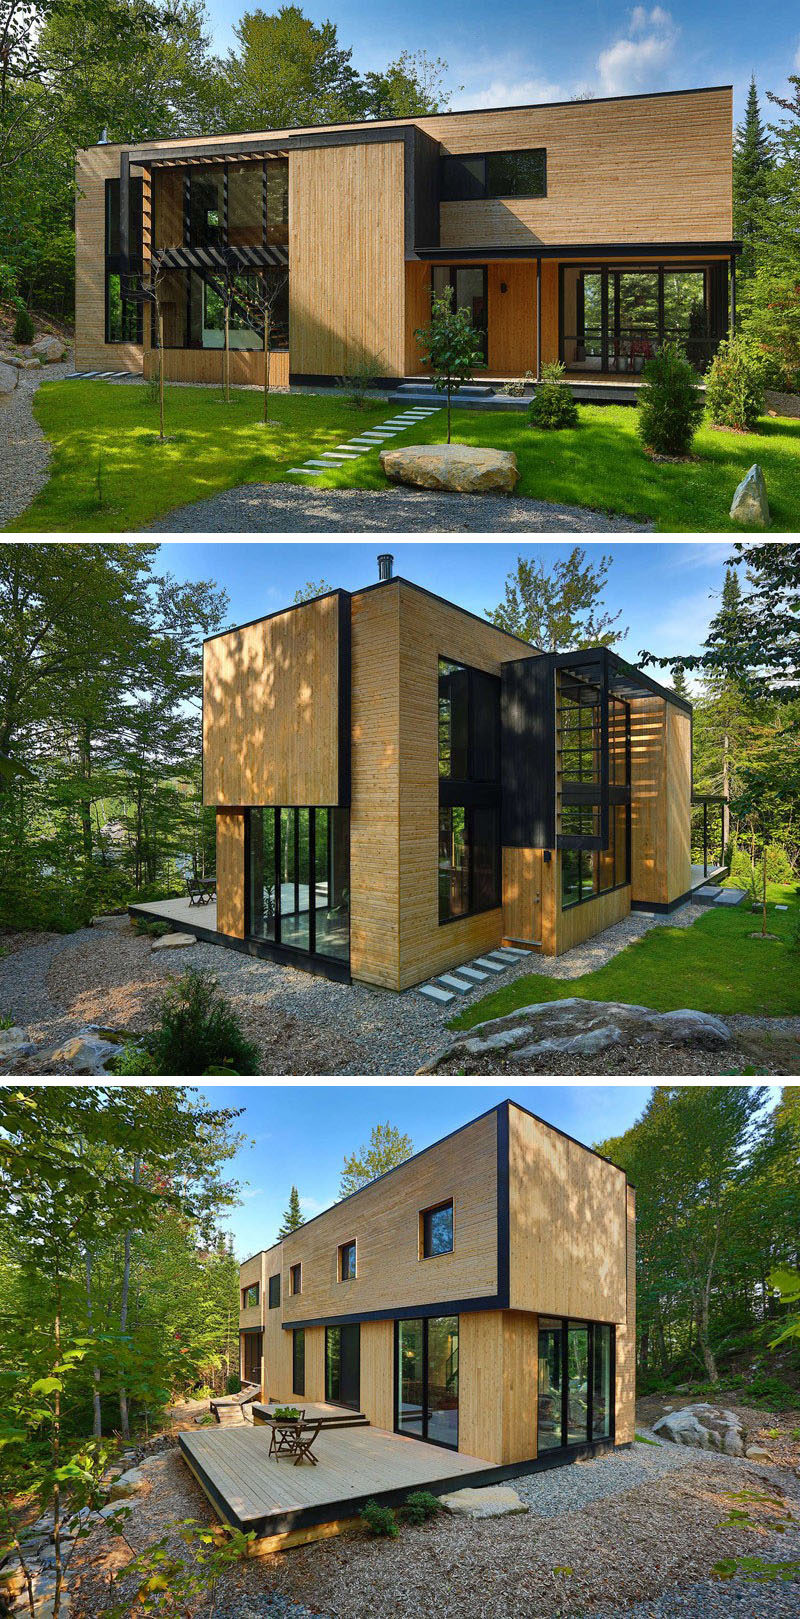 18 Modern House In The Forest // Light colored wood covers the exterior of this house surrounded by forest, helping it fit right in among the rest of the wood in the forest.